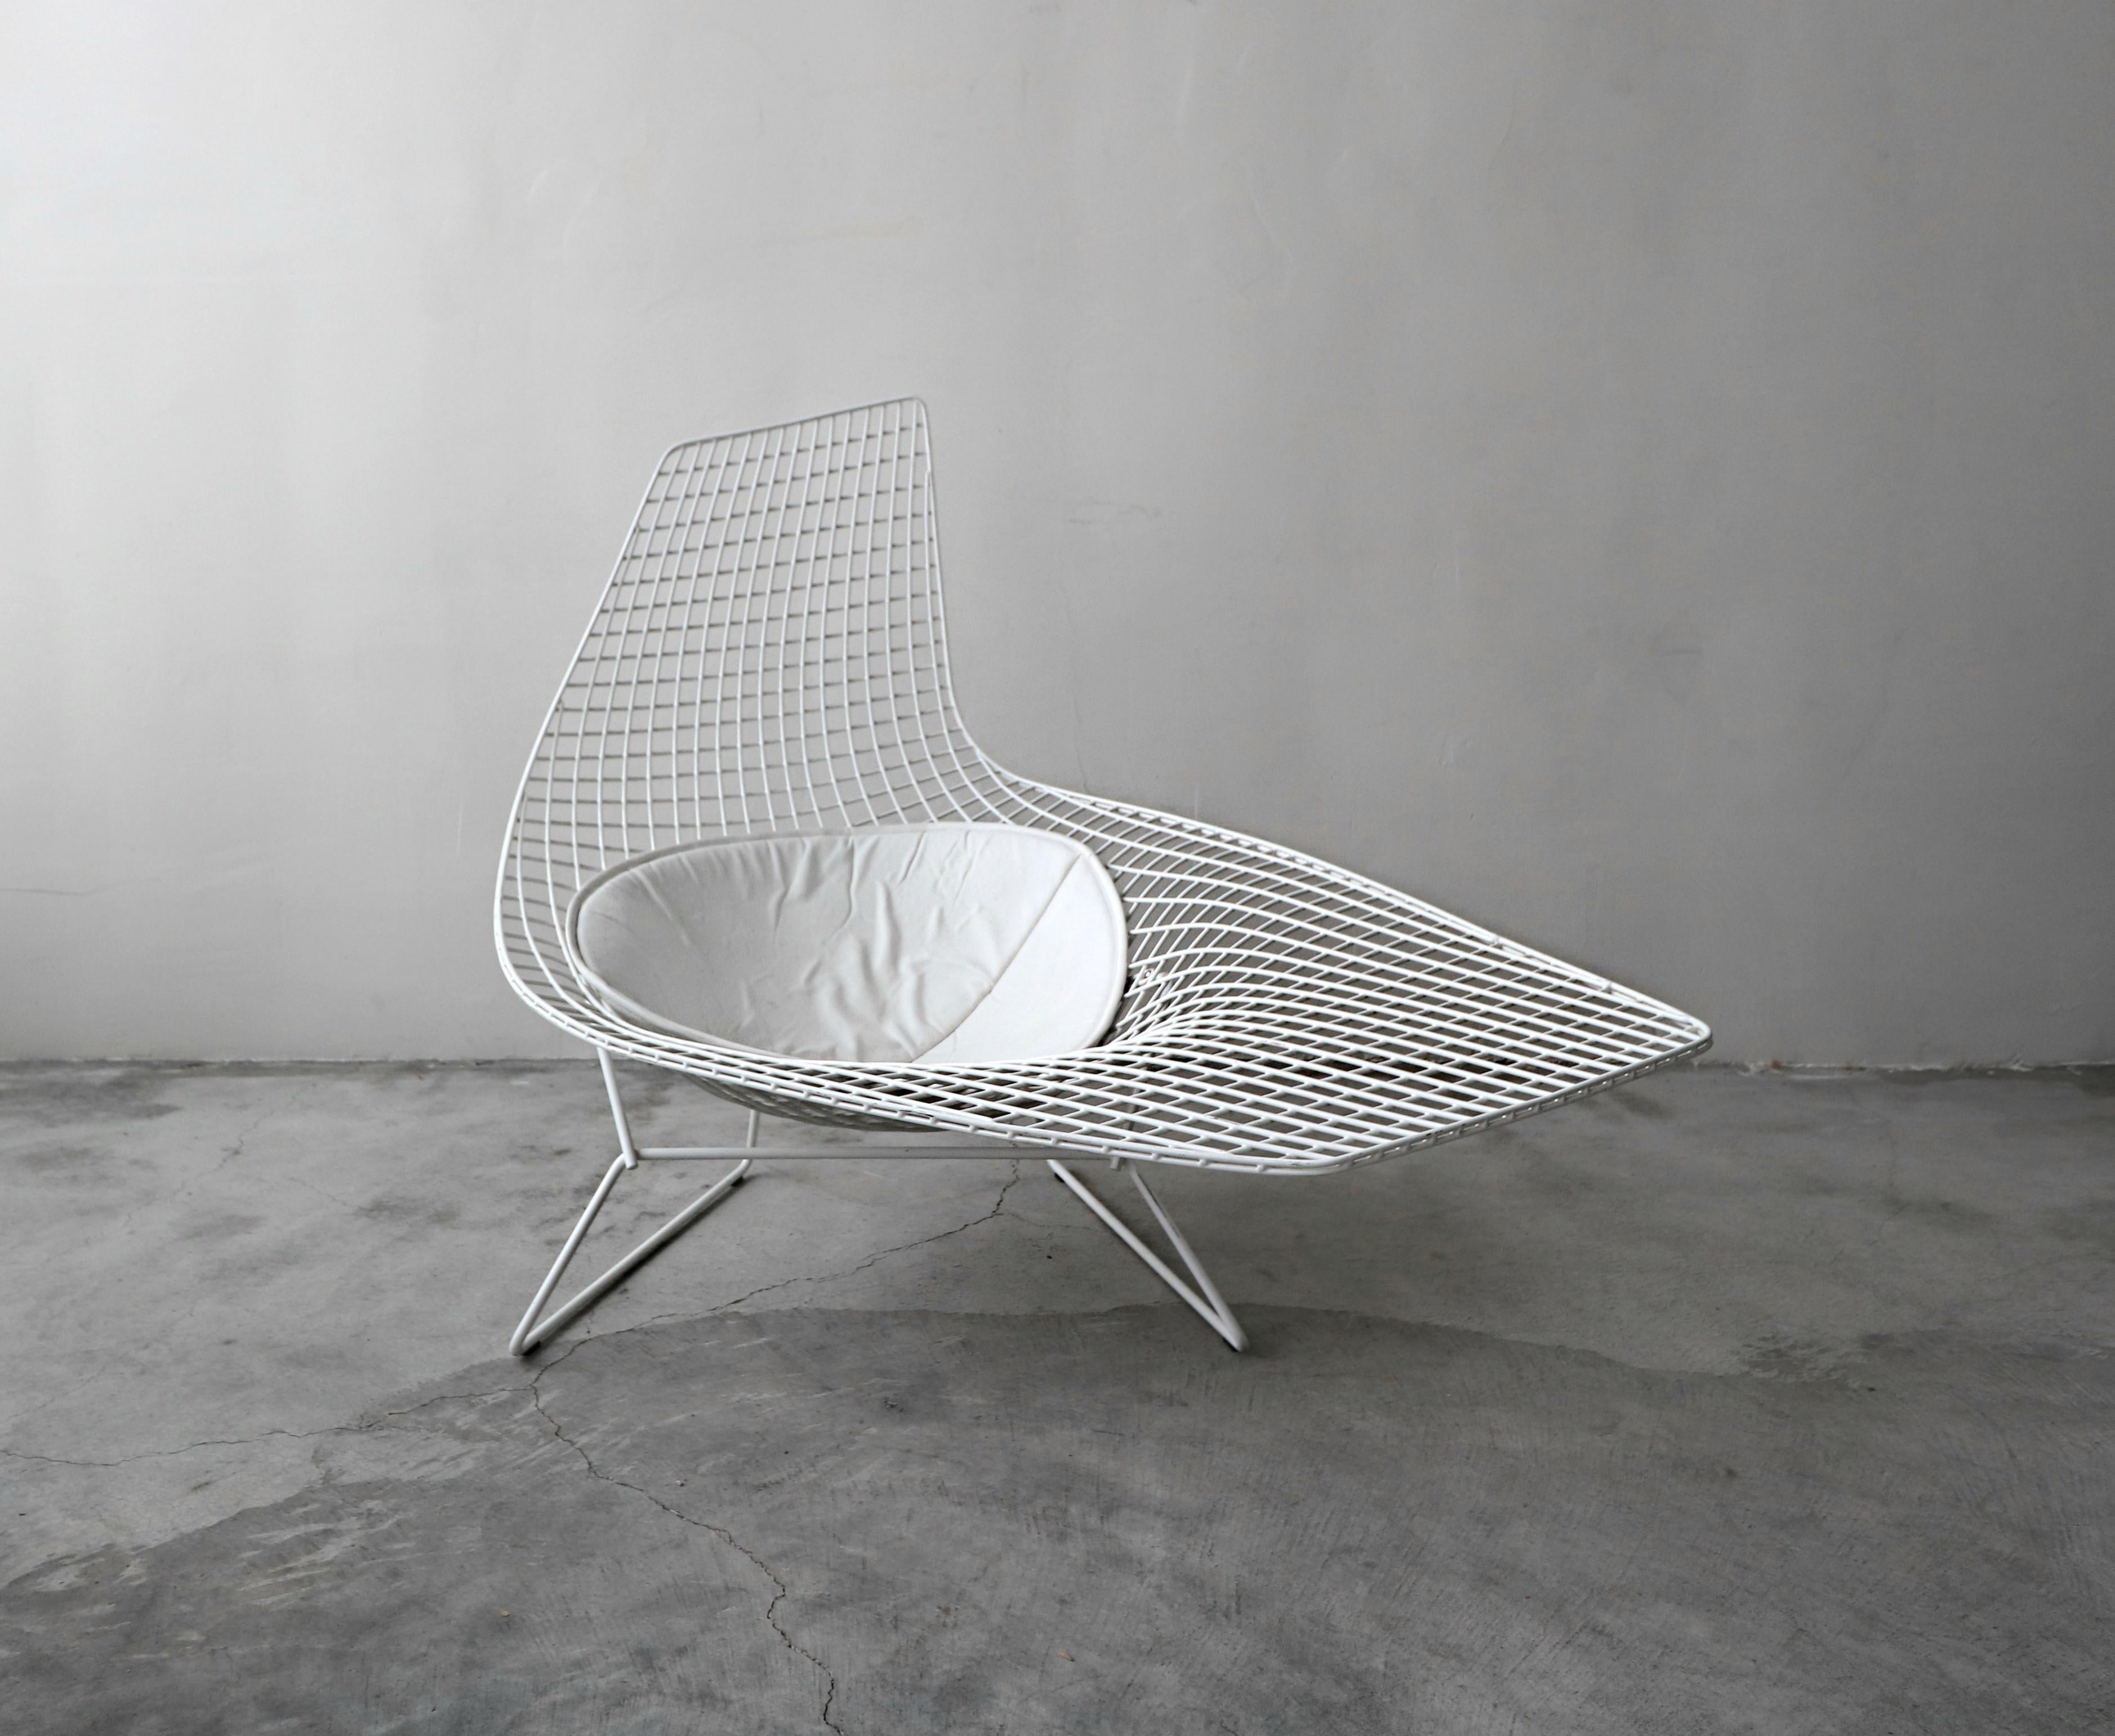 Authentic Knoll Bertoia asymmetric chaise, with white frame and seat cushion in excellent condition.

